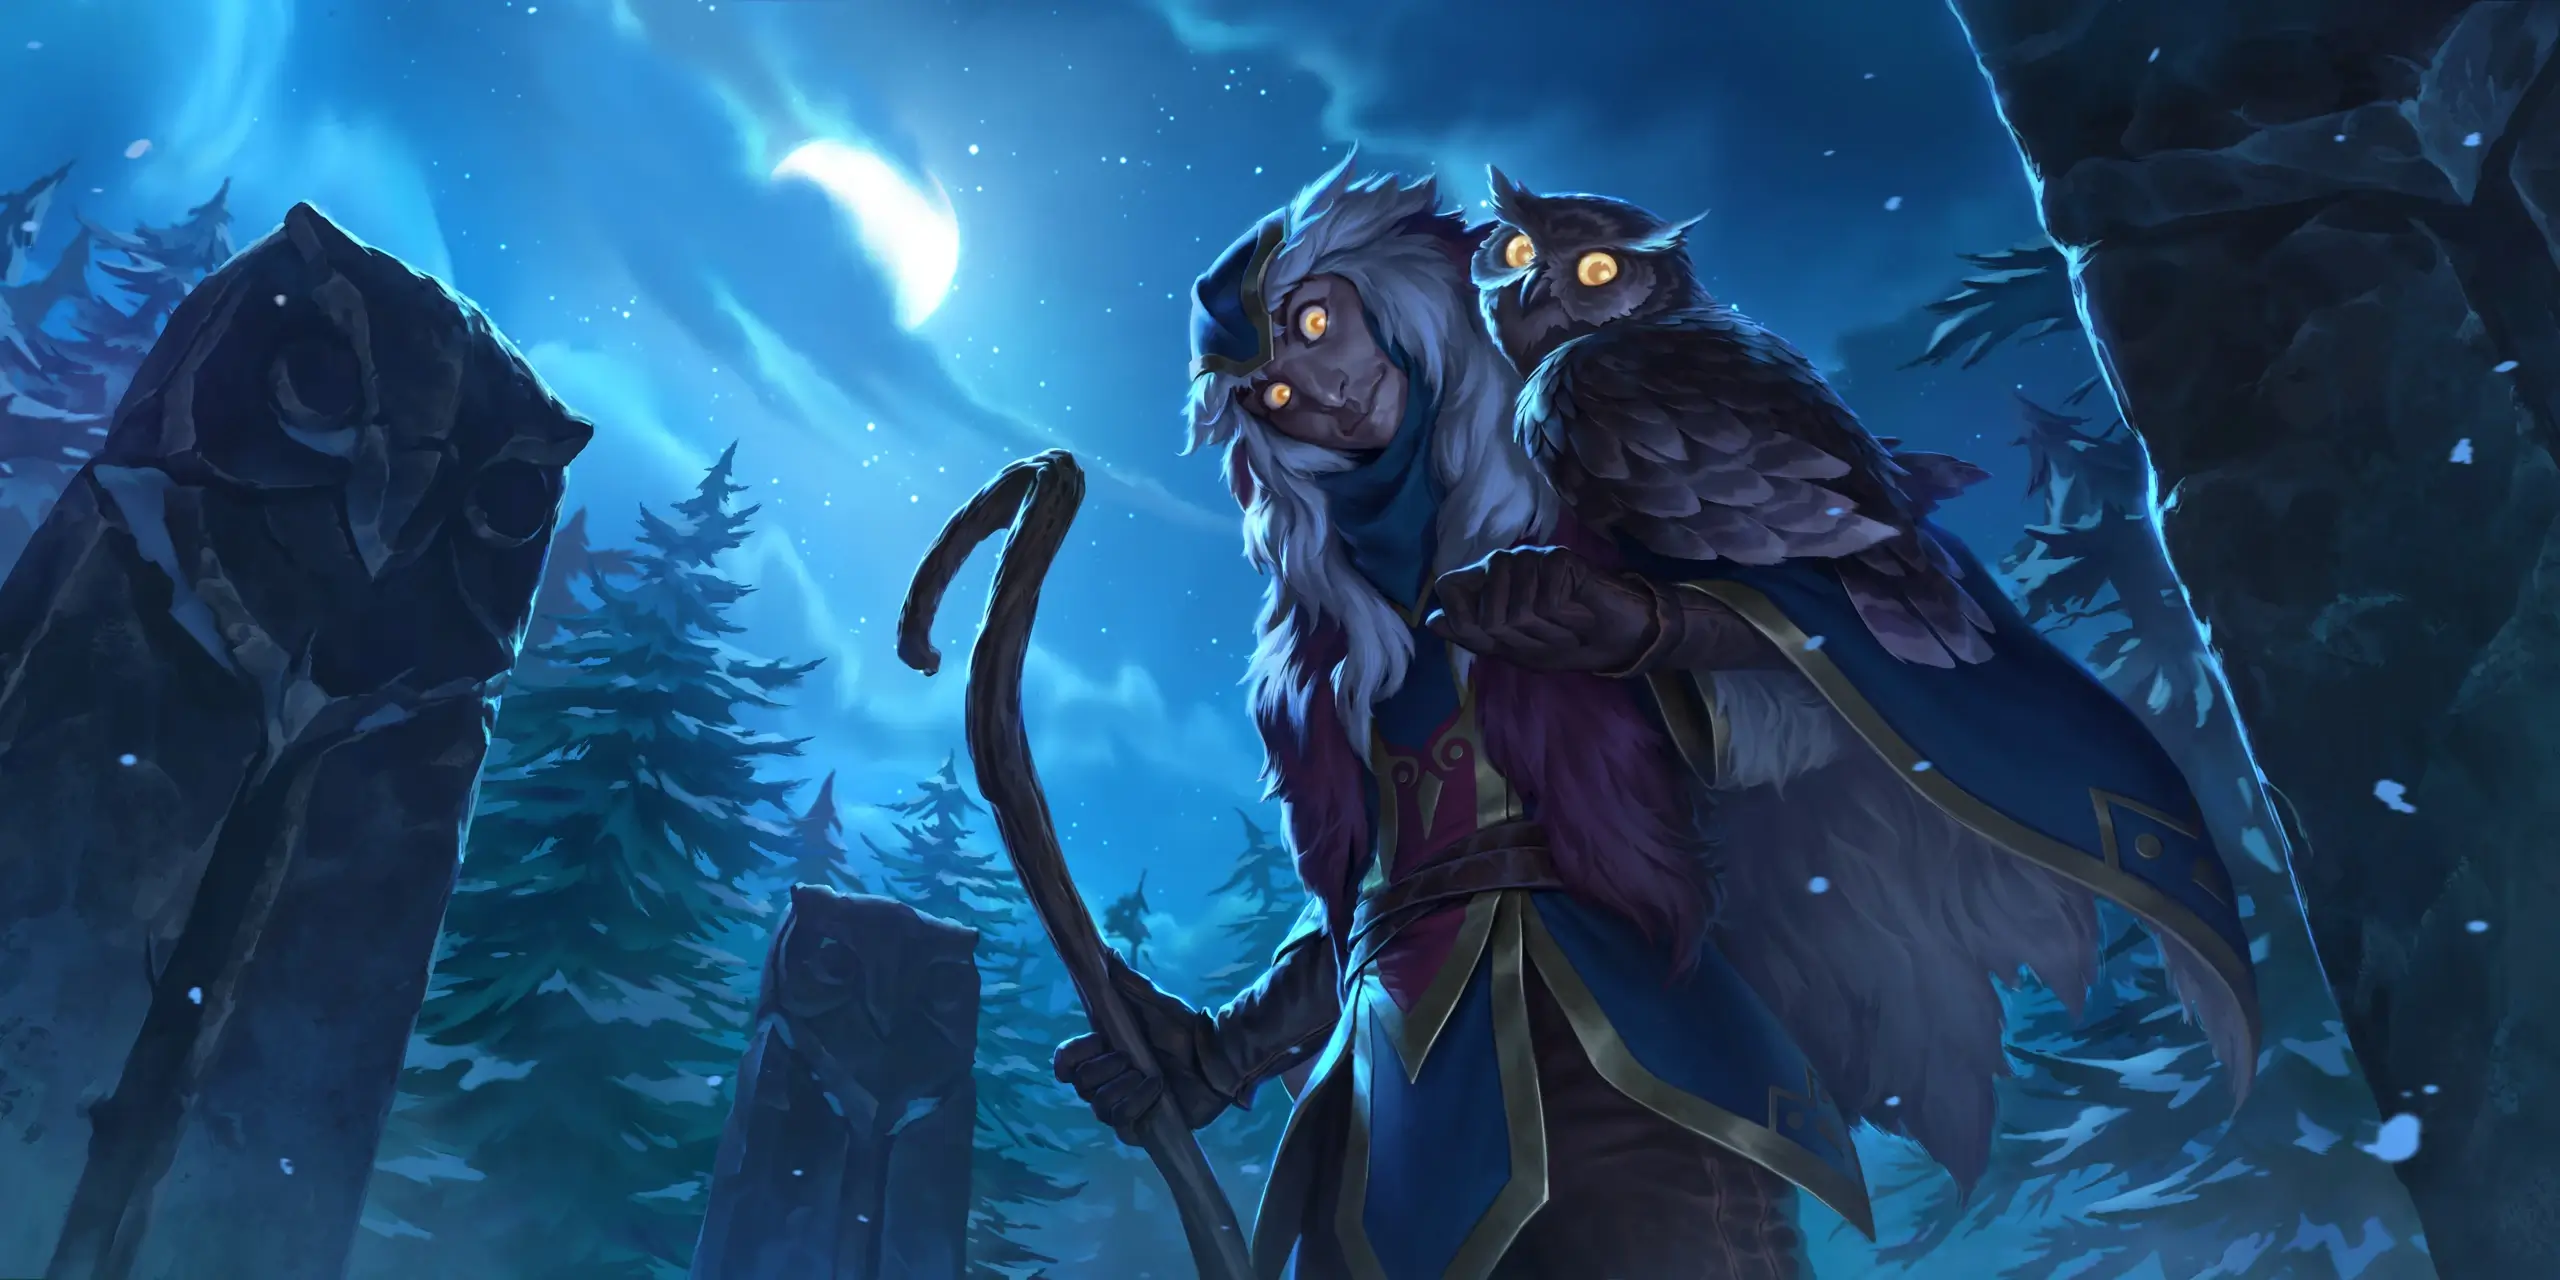 Starlit Seer in Freljord with amazing yellow eyes peering into you with an equally stunning owl on arm